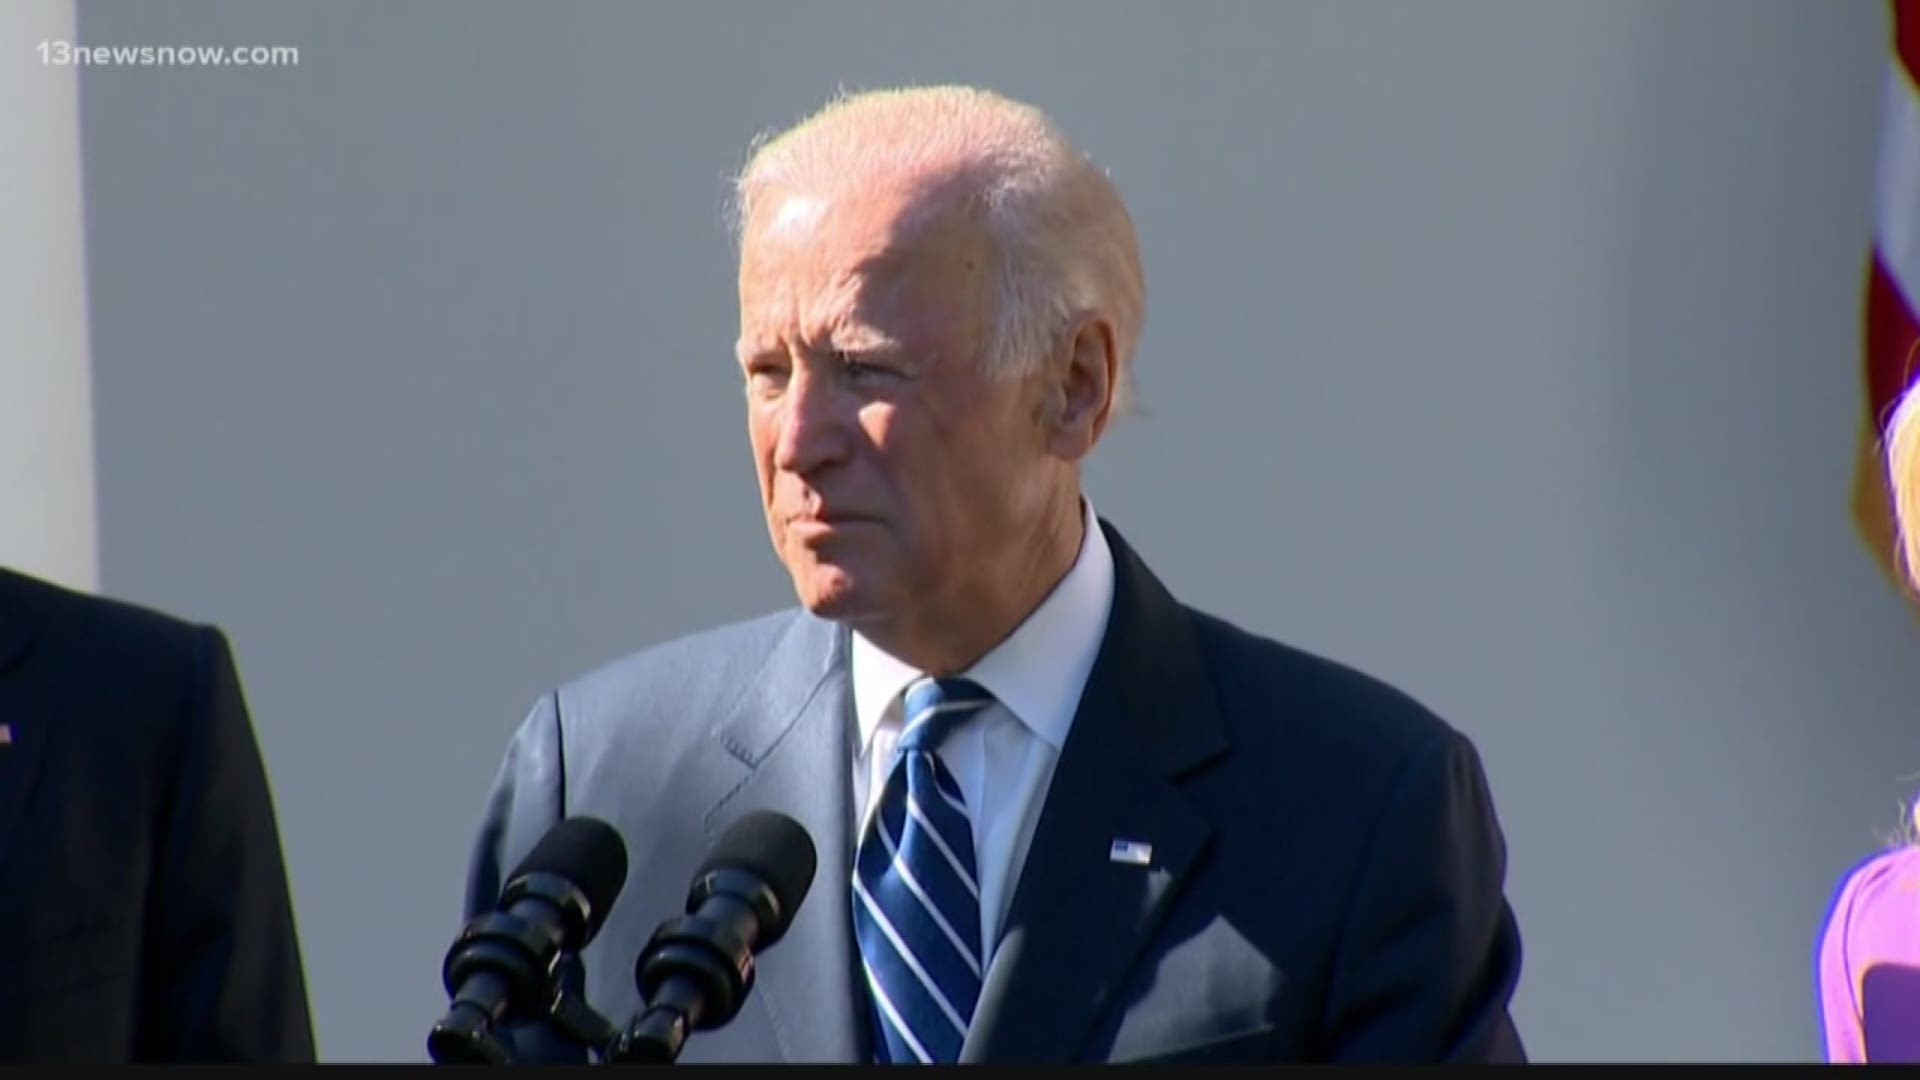 Former Vice President Joe Biden will be stopping in Newport News this week.